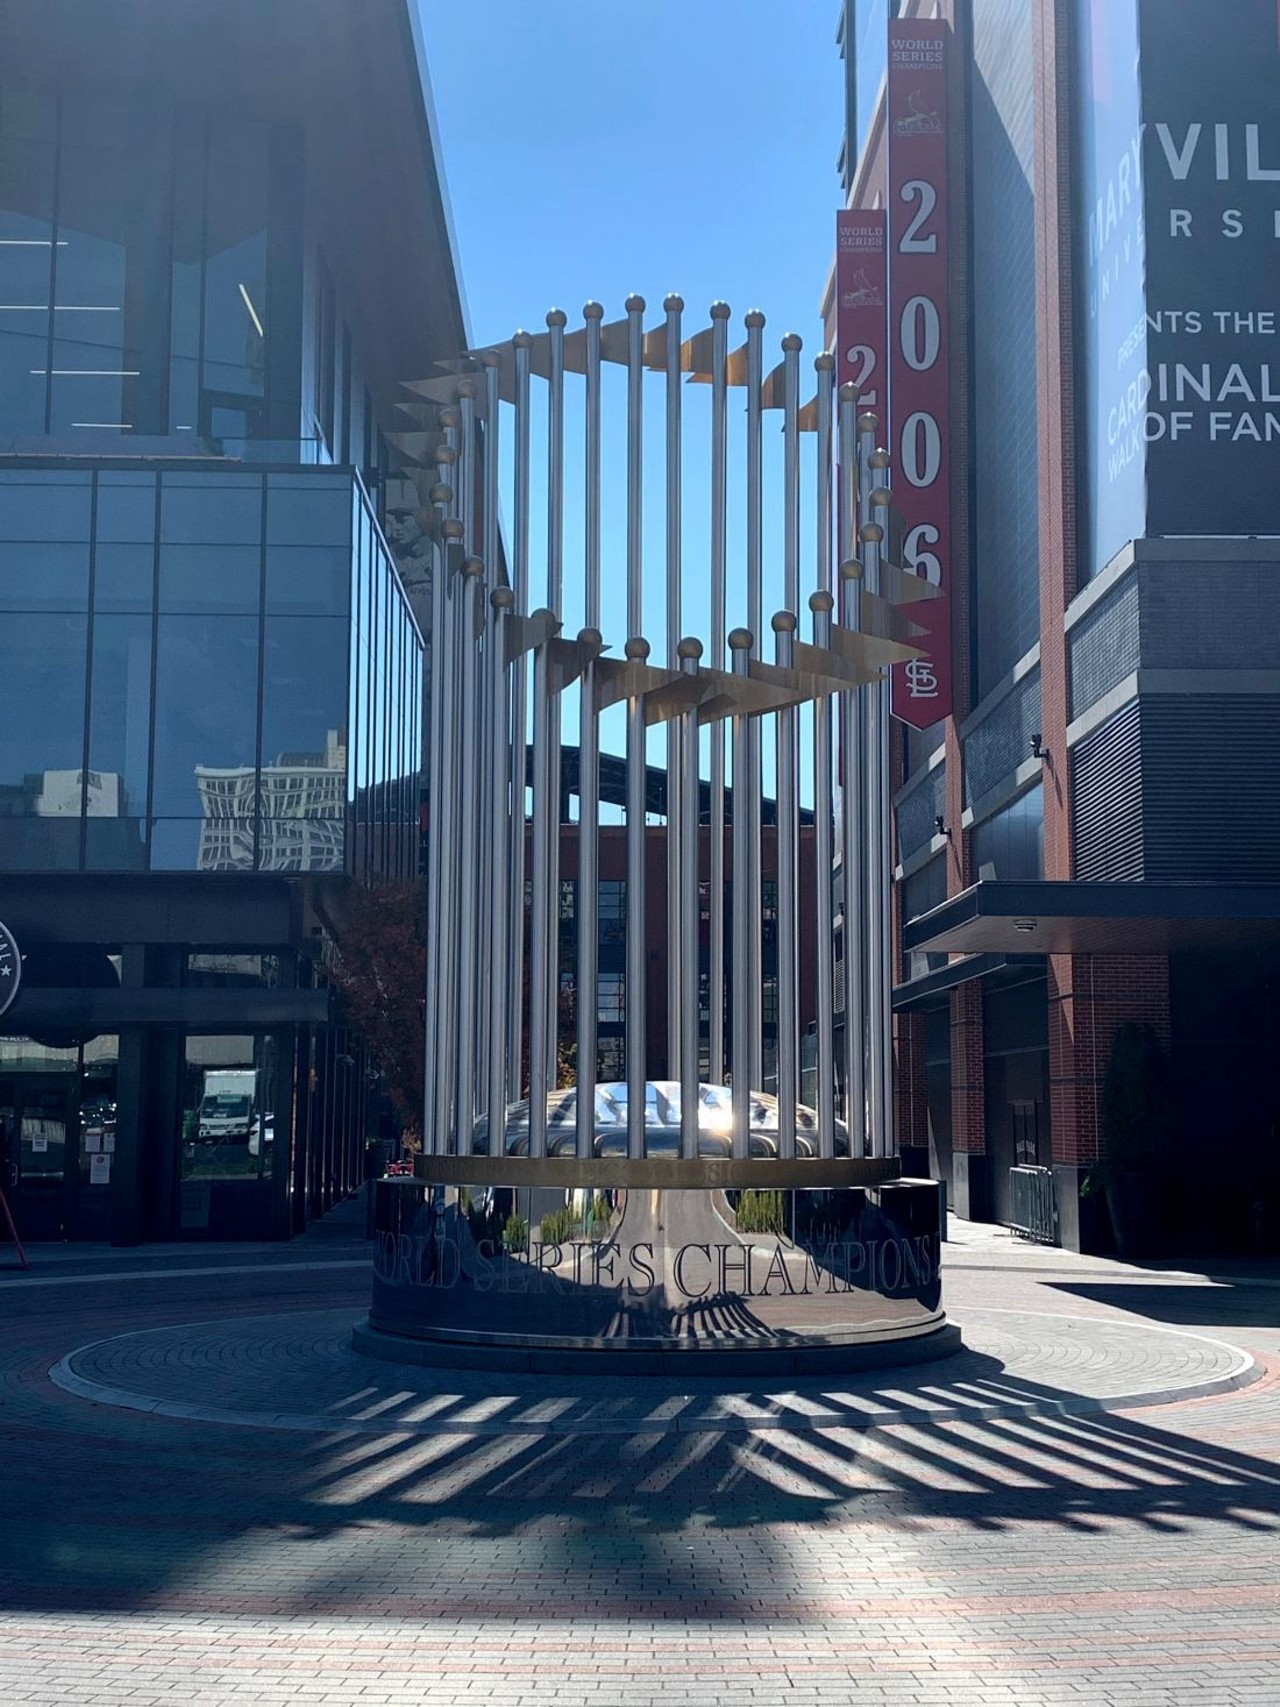 Giant World Series Trophy
Ballpark Village (601 Clark Avenue)
Monument was completed in 2020.
Photo credit: Riverfront Times / @riverfronttimes on Instagram